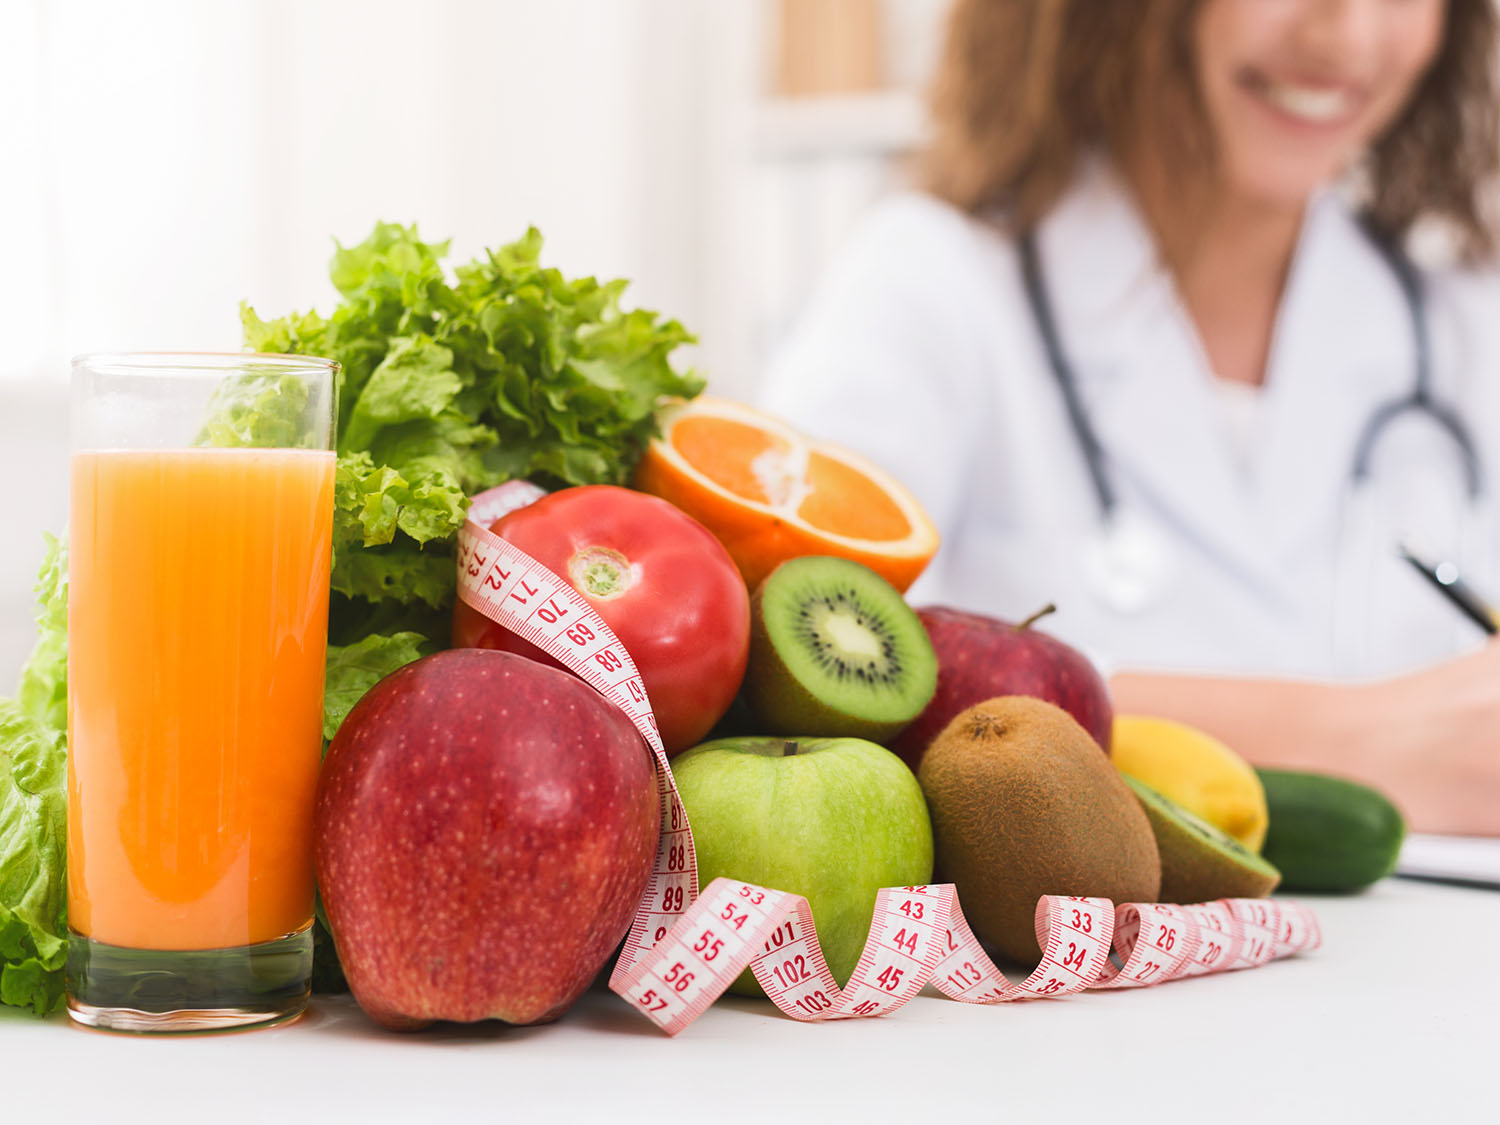 How to make a career as a nutritionist